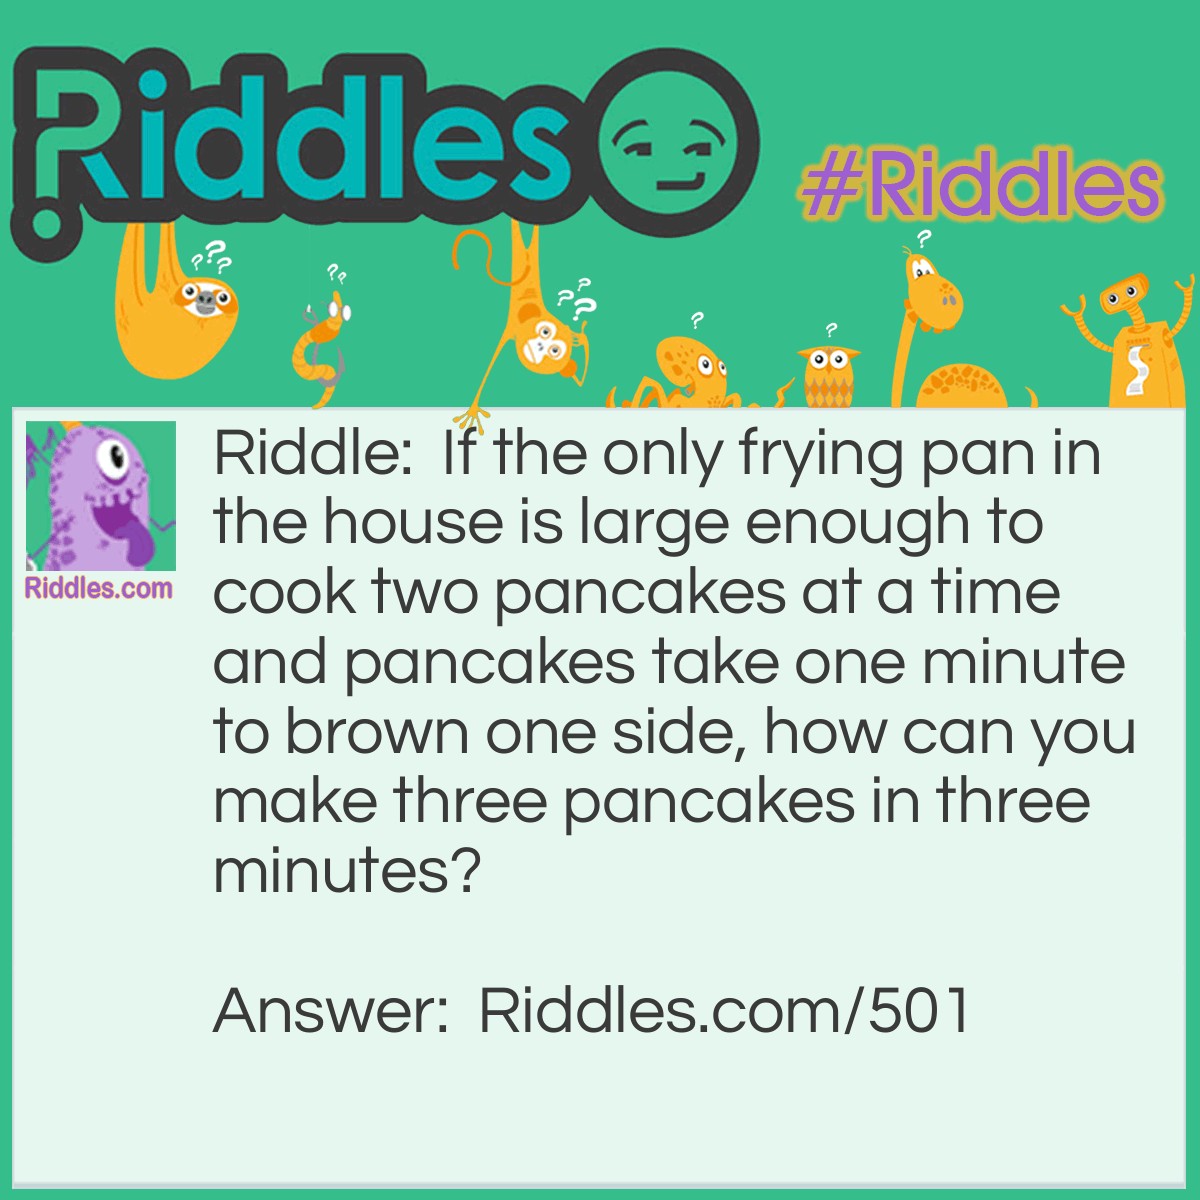 Riddle: If the only frying pan in the house is large enough to cook two pancakes at a time and pancakes take one minute to brown one side, how can you make three pancakes in three minutes? Answer: Pour two pancakes and brown the first side. After the first side is done, flip one, take the second off, and pour the third pancake. After another minute, take the first one off, flip the third one, and put the second one back on. Cook both pancakes until finished.